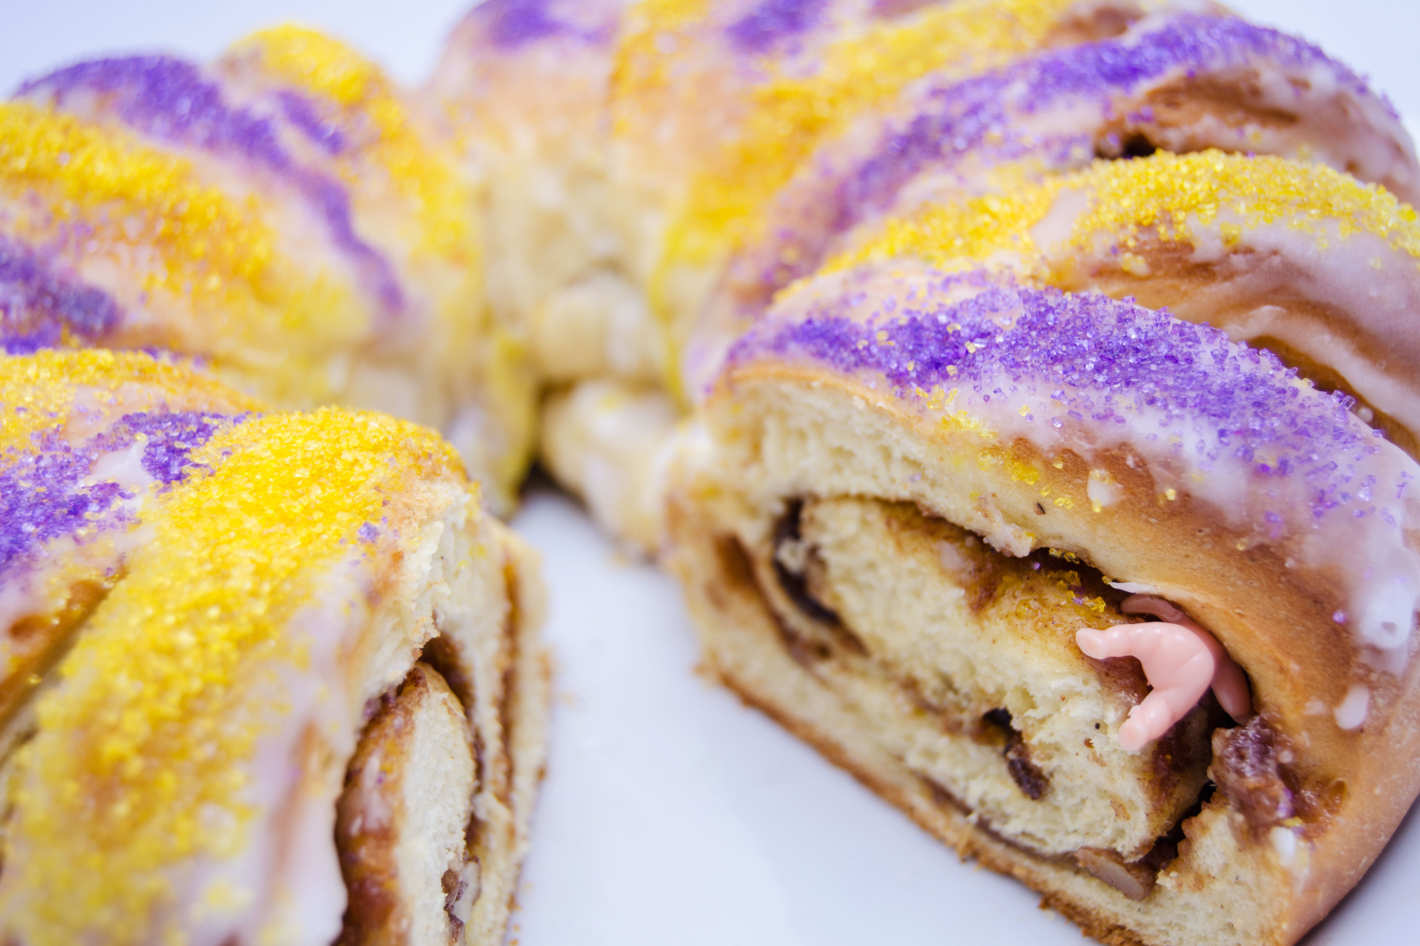 Lawsuit Happy Americans Are Ruining King Cake Trinkets for